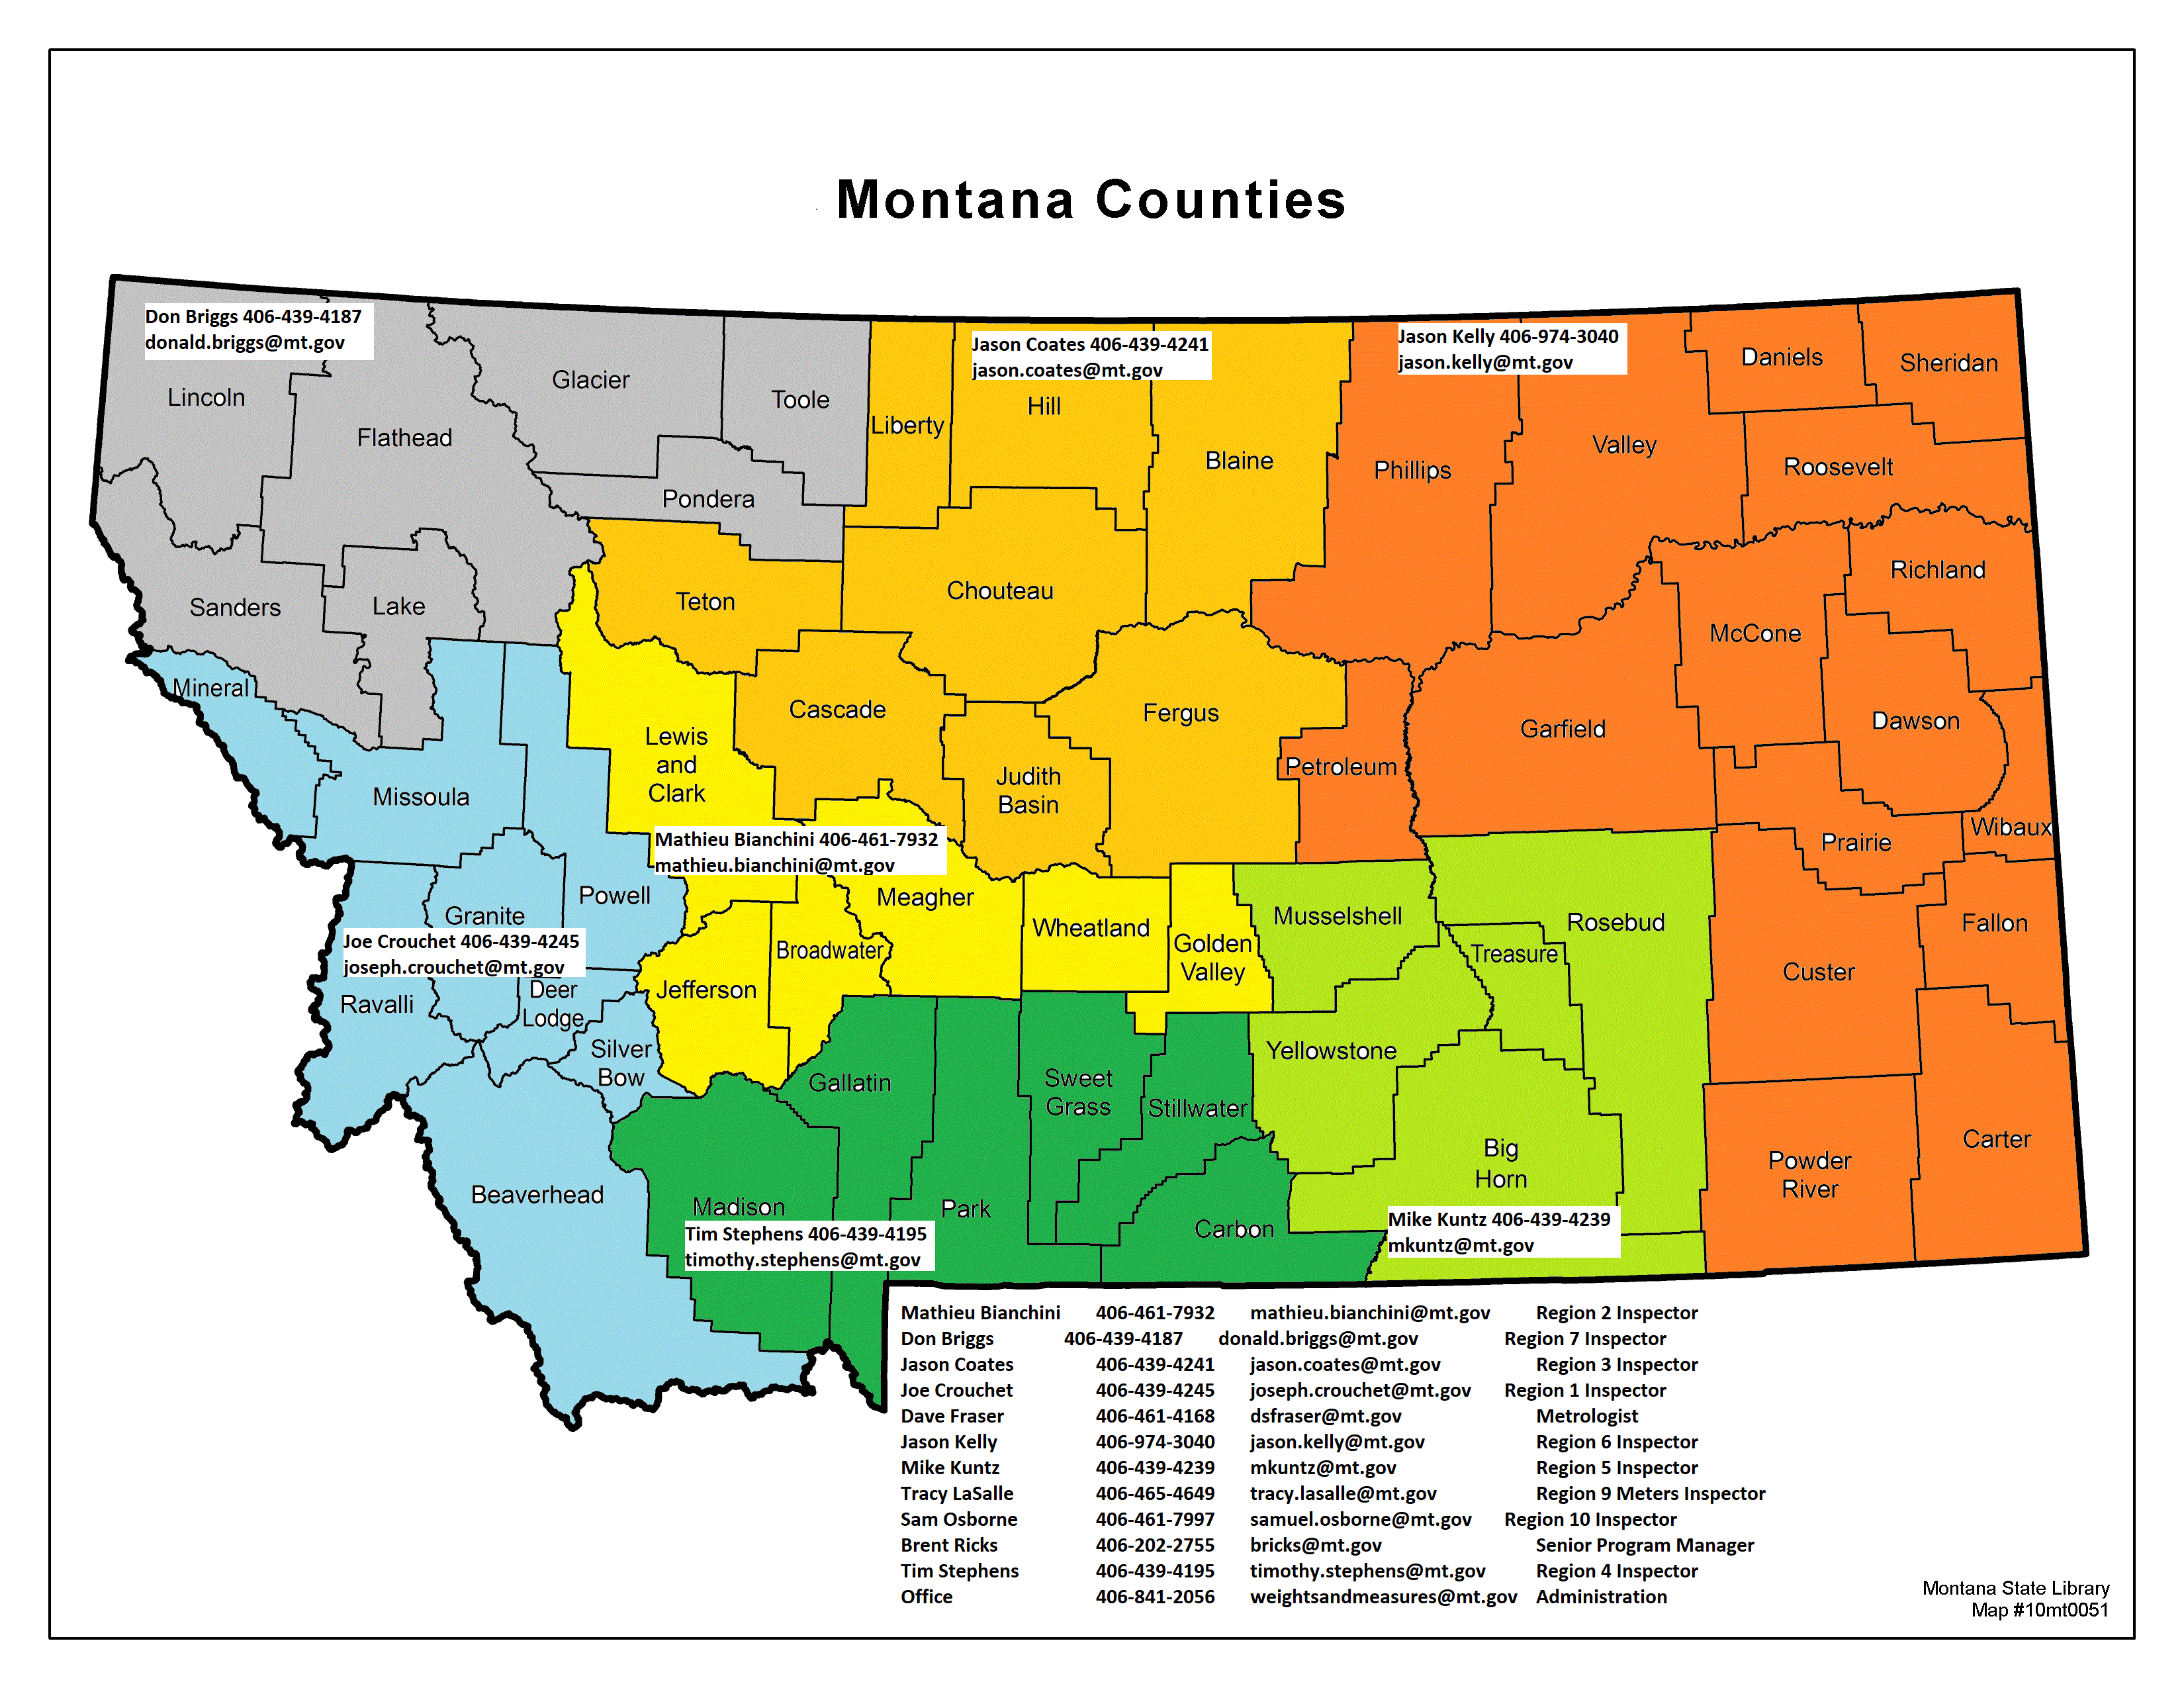 Map of Montana Counties with Inspector Indicated